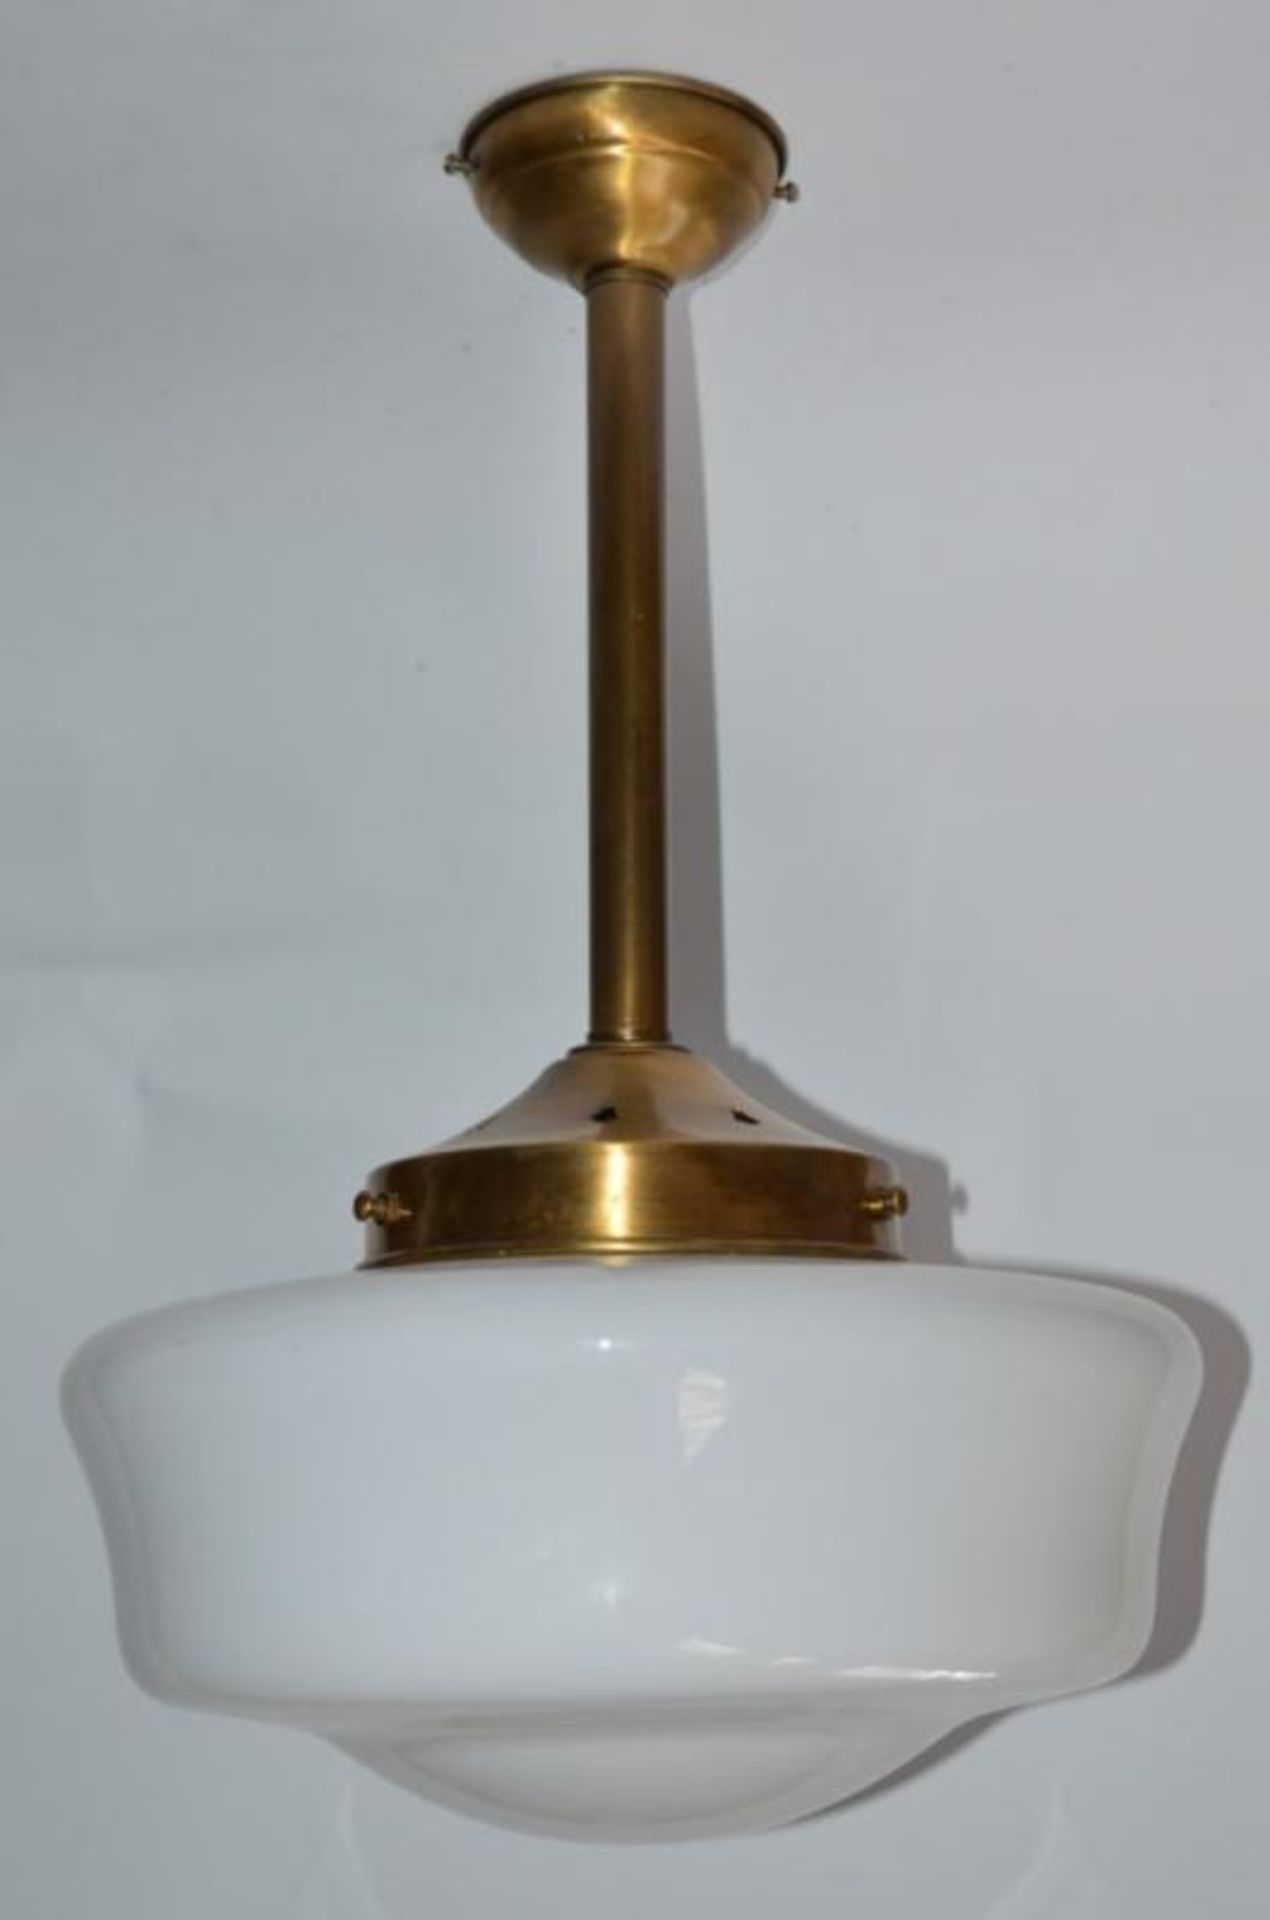 A Pair Of Art Deco Style Ceiling Lights With Brass Bases and White Opal Glass Shades + Extra Base - Image 2 of 8